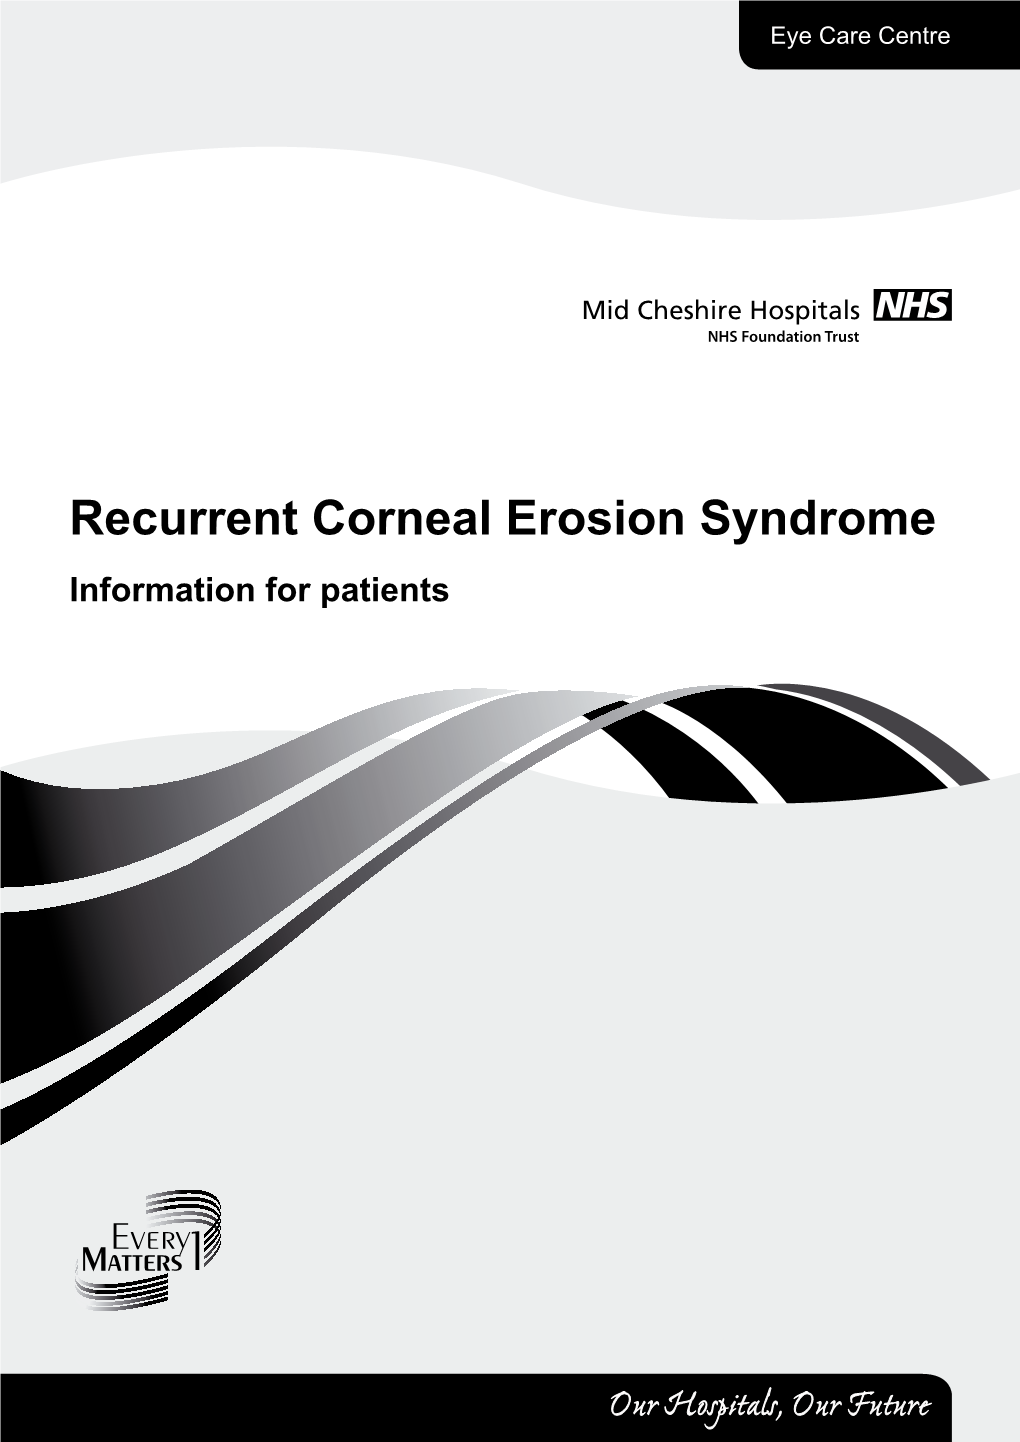 Recurrent Corneal Erosion Syndrome Information for Patients